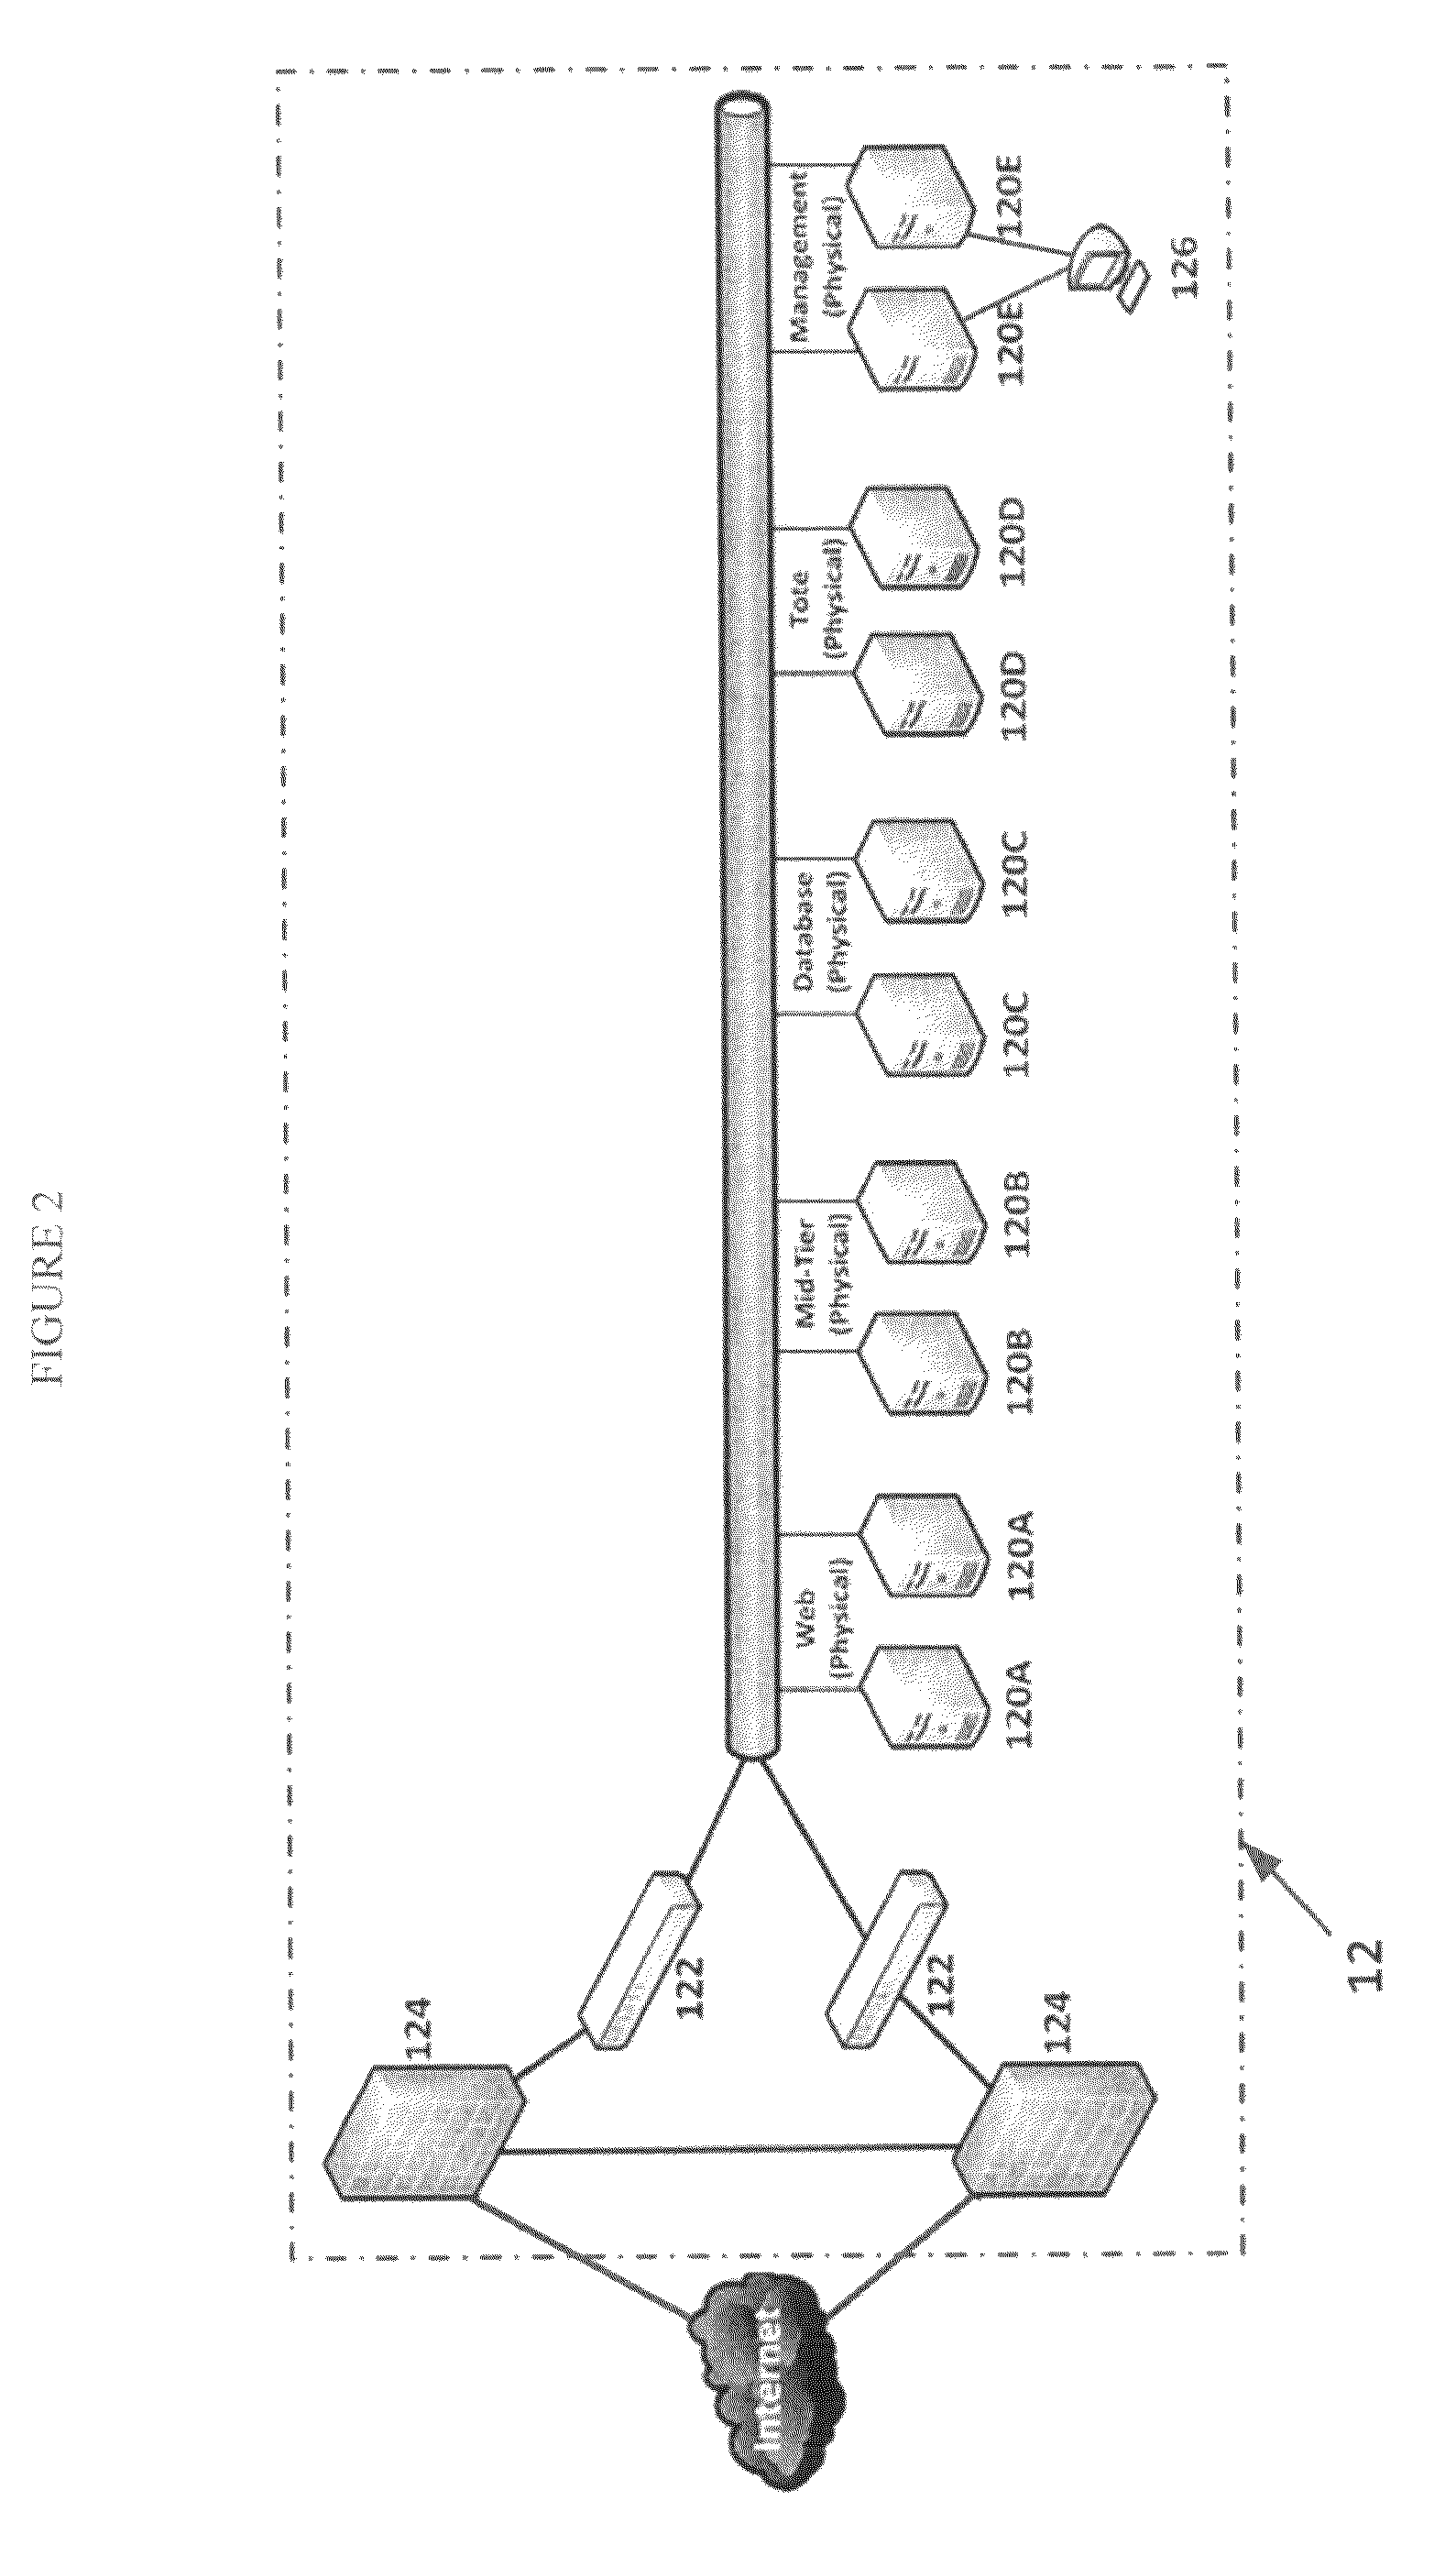 Pool wagering apparatus, methods and systems